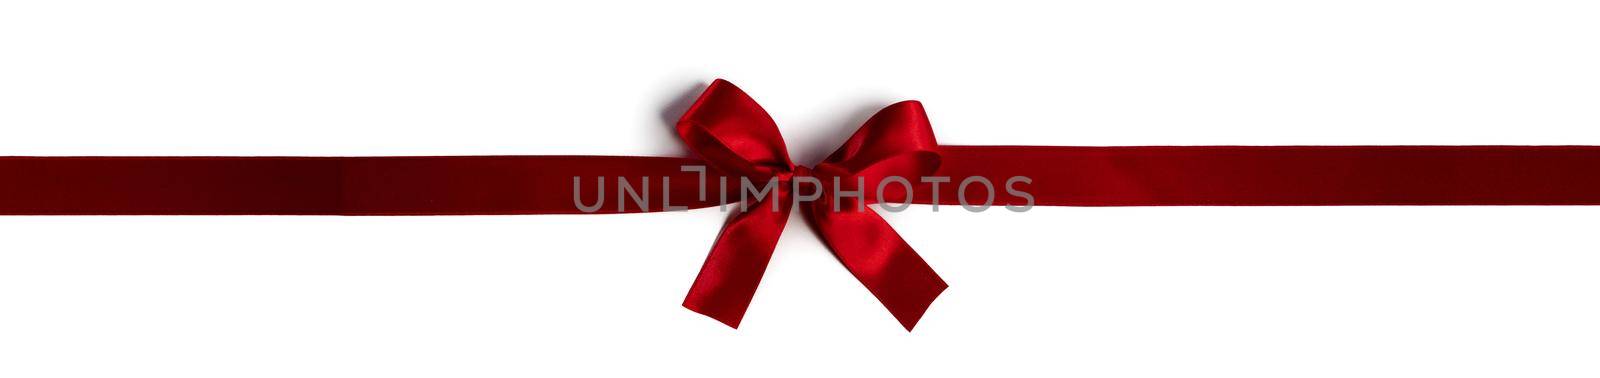 Red bow on white background by Yellowj